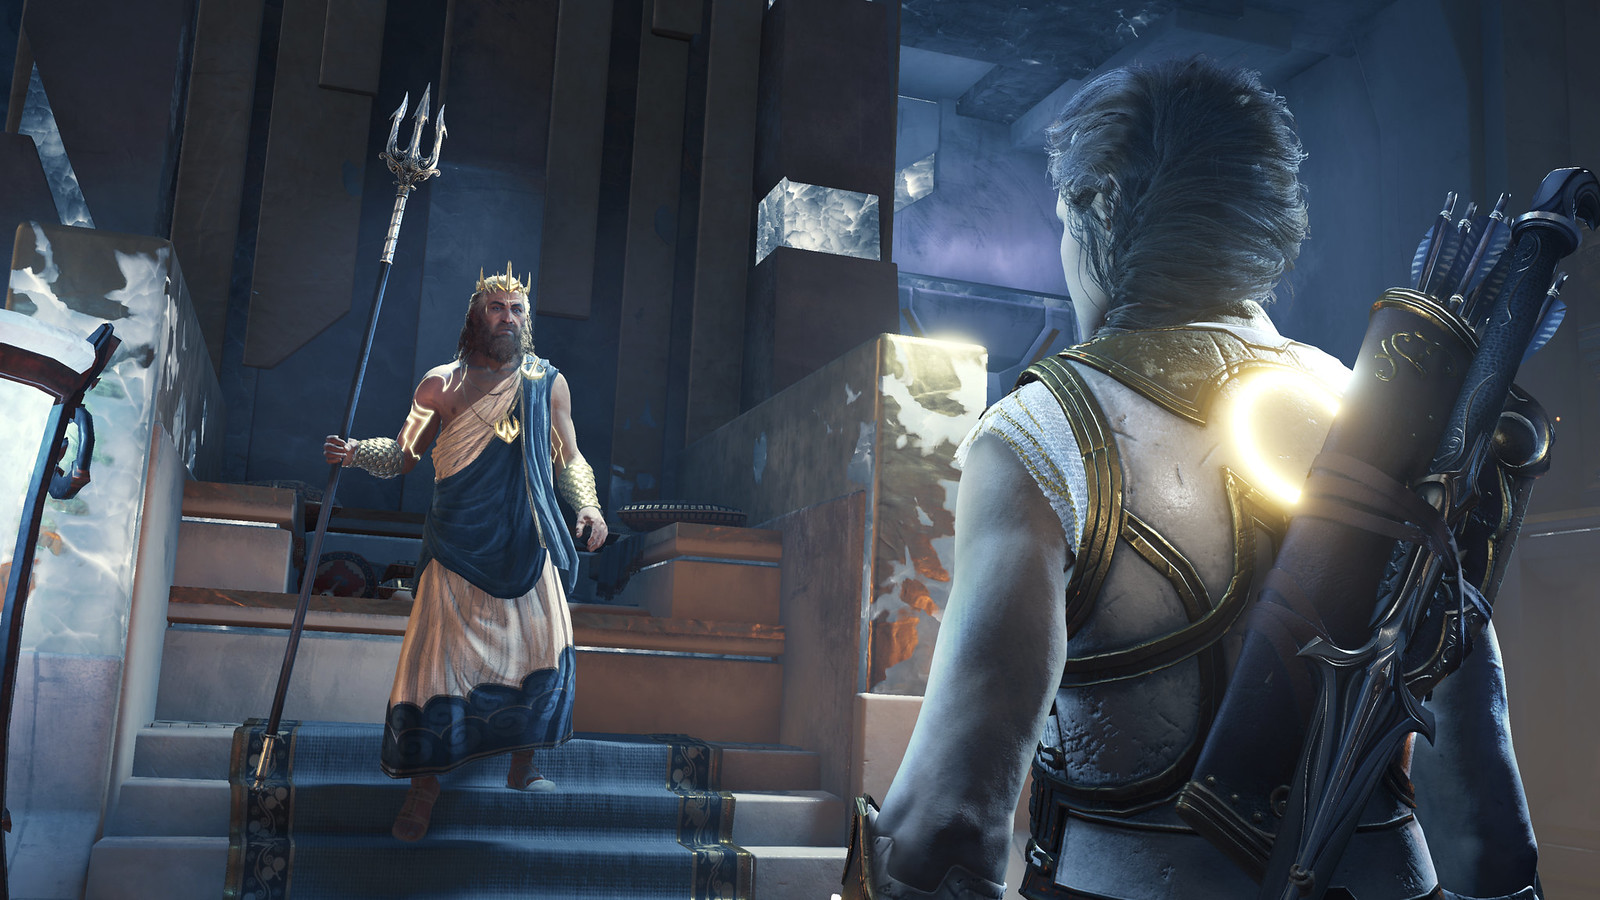 Assassin's Creed Odyssey: Judgment of Atlantis DLC on PS4